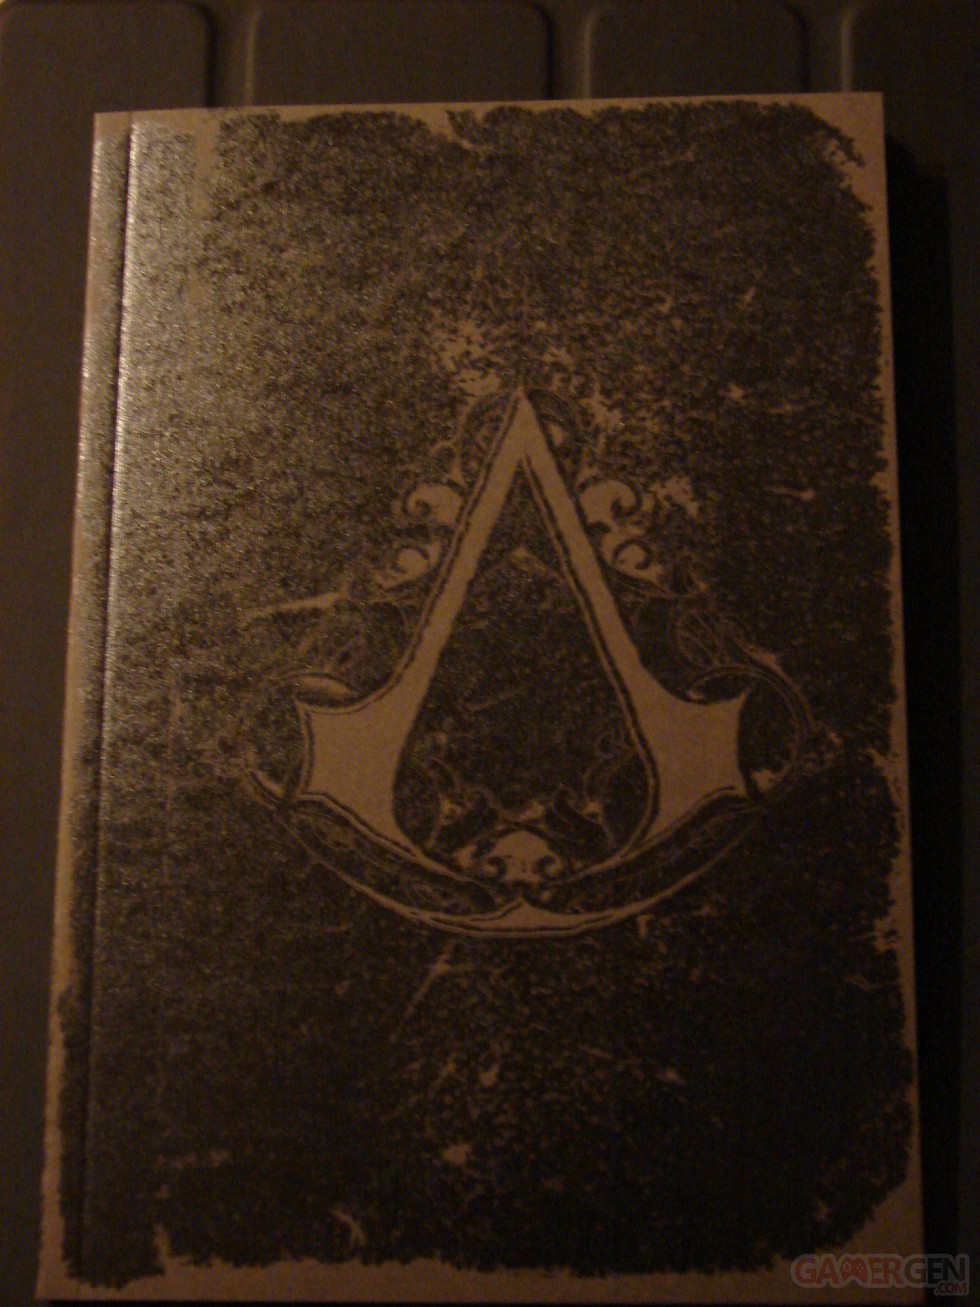 assassin-s-creed-III-collector-us-canada-limited-edition-photo-13